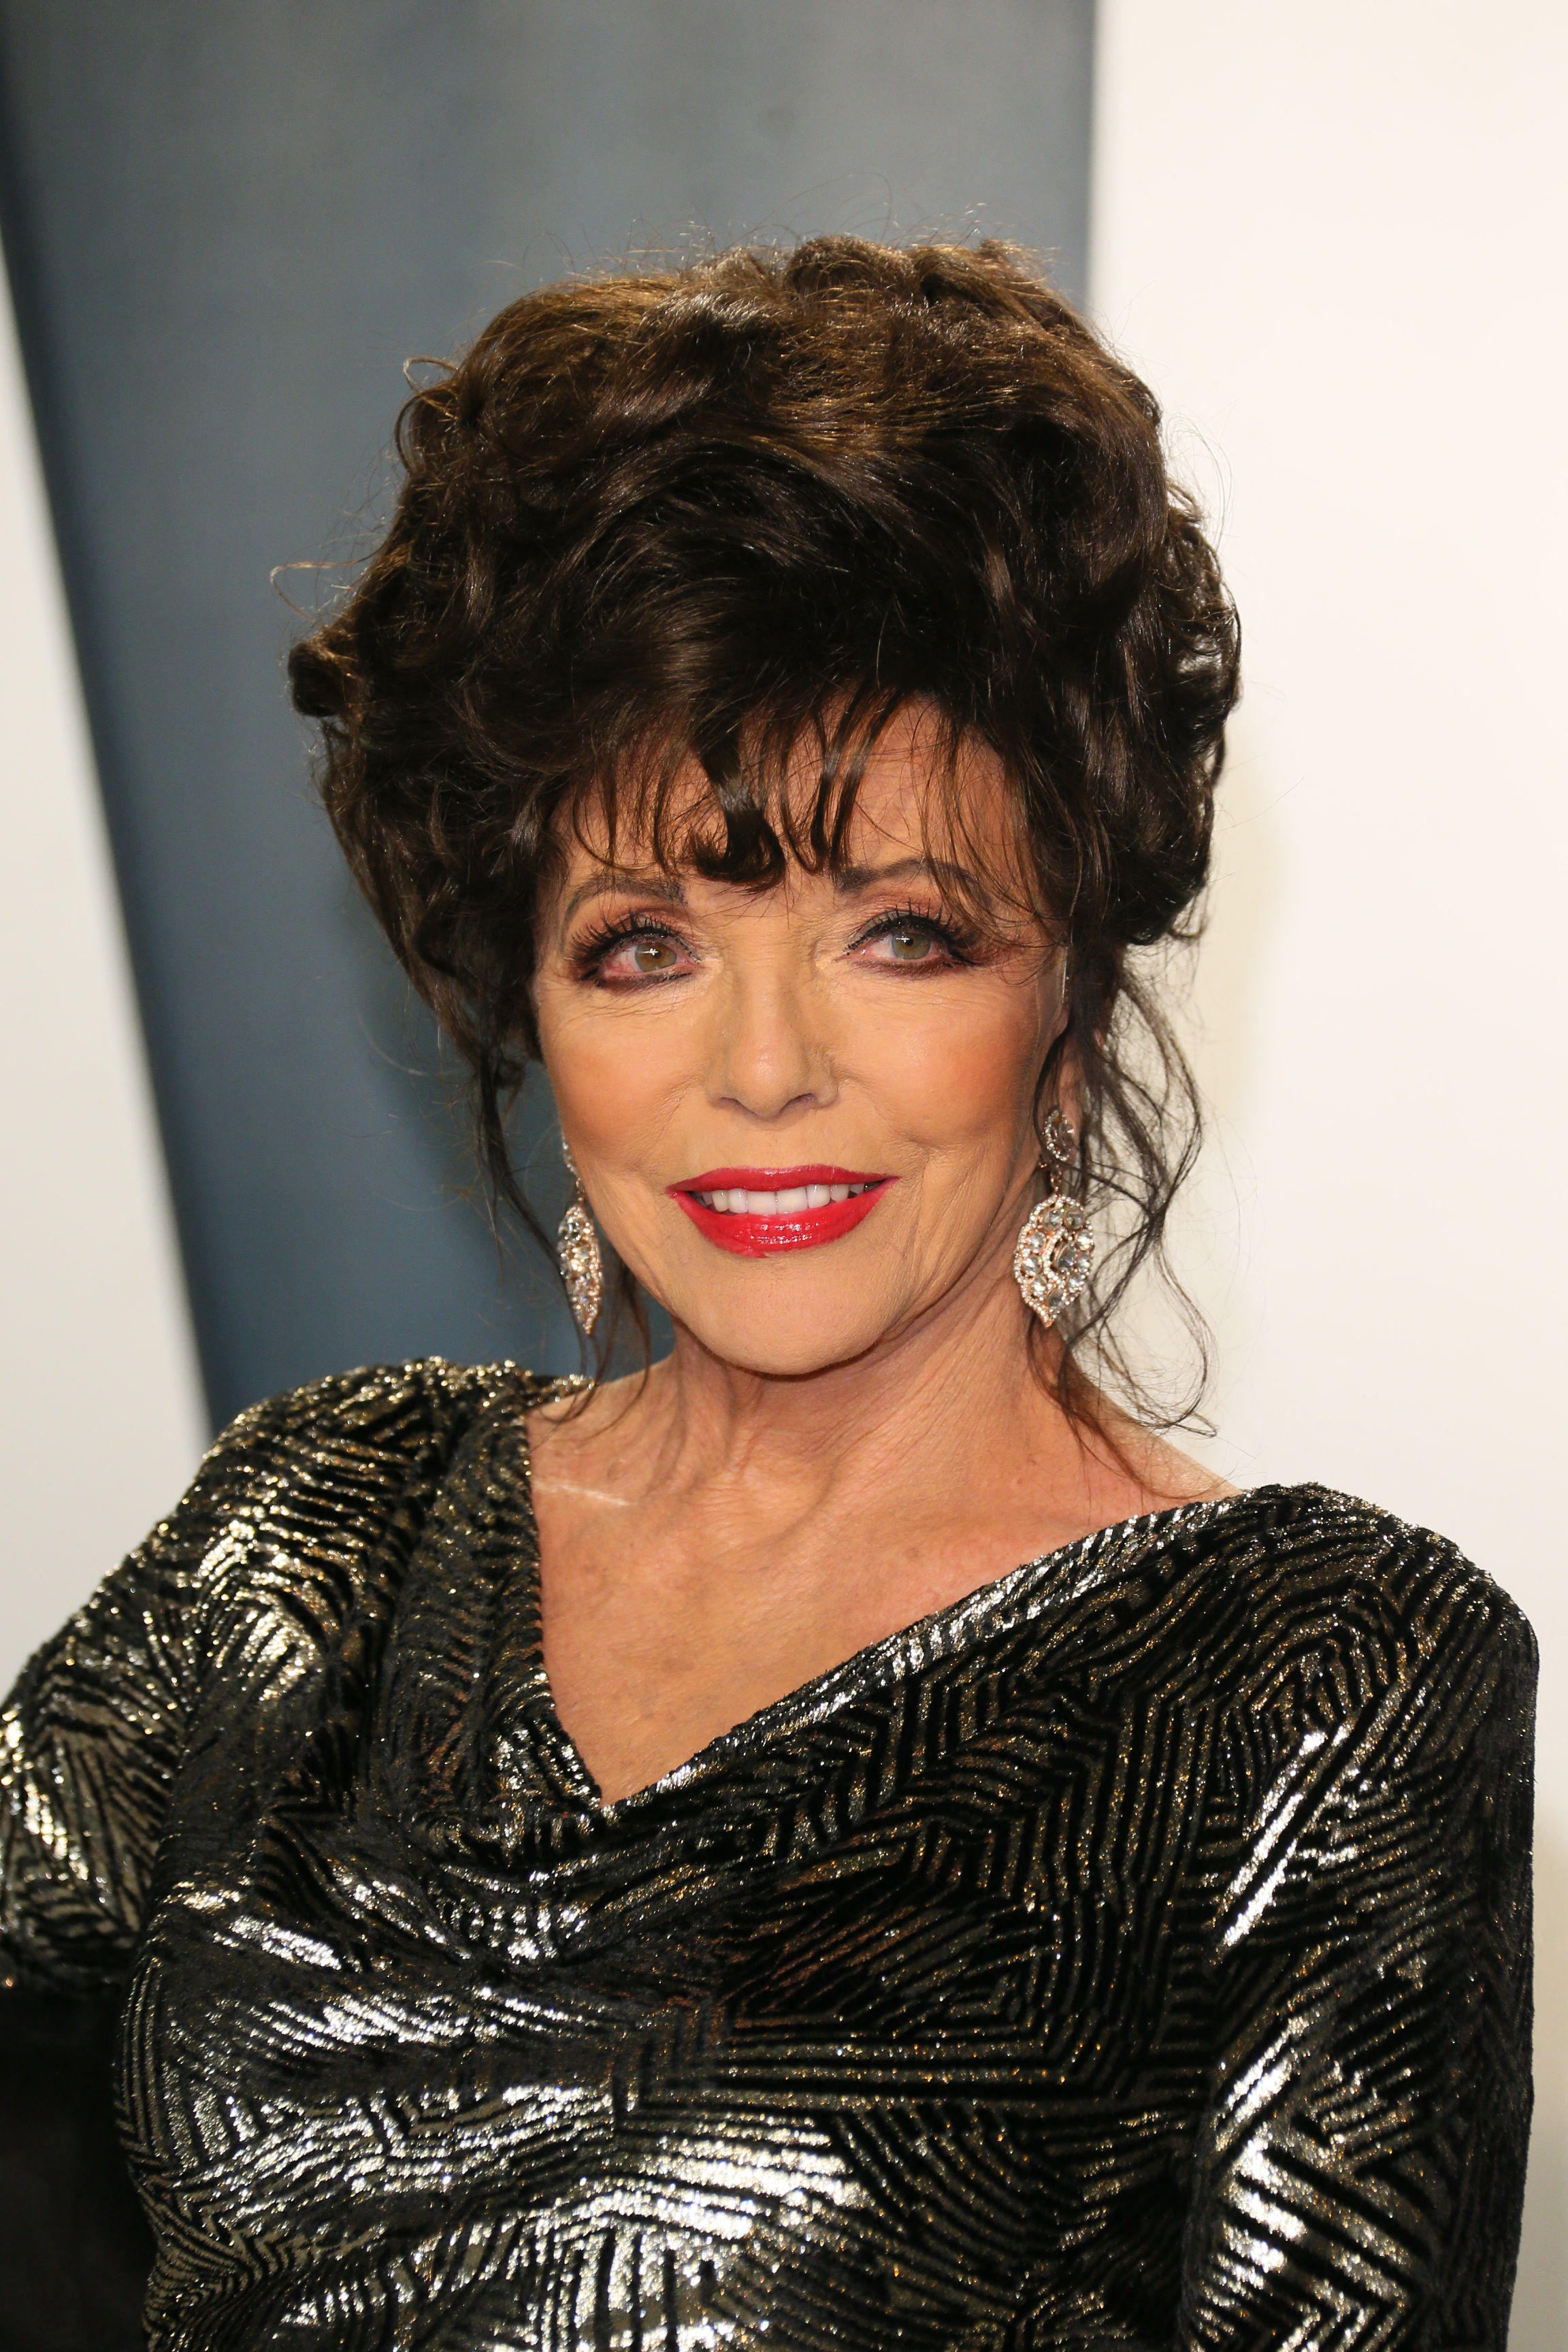 Joan Collins at The Wallis Annenberg Center for the Performing Arts in Beverly Hills, California. | Source: Getty Images